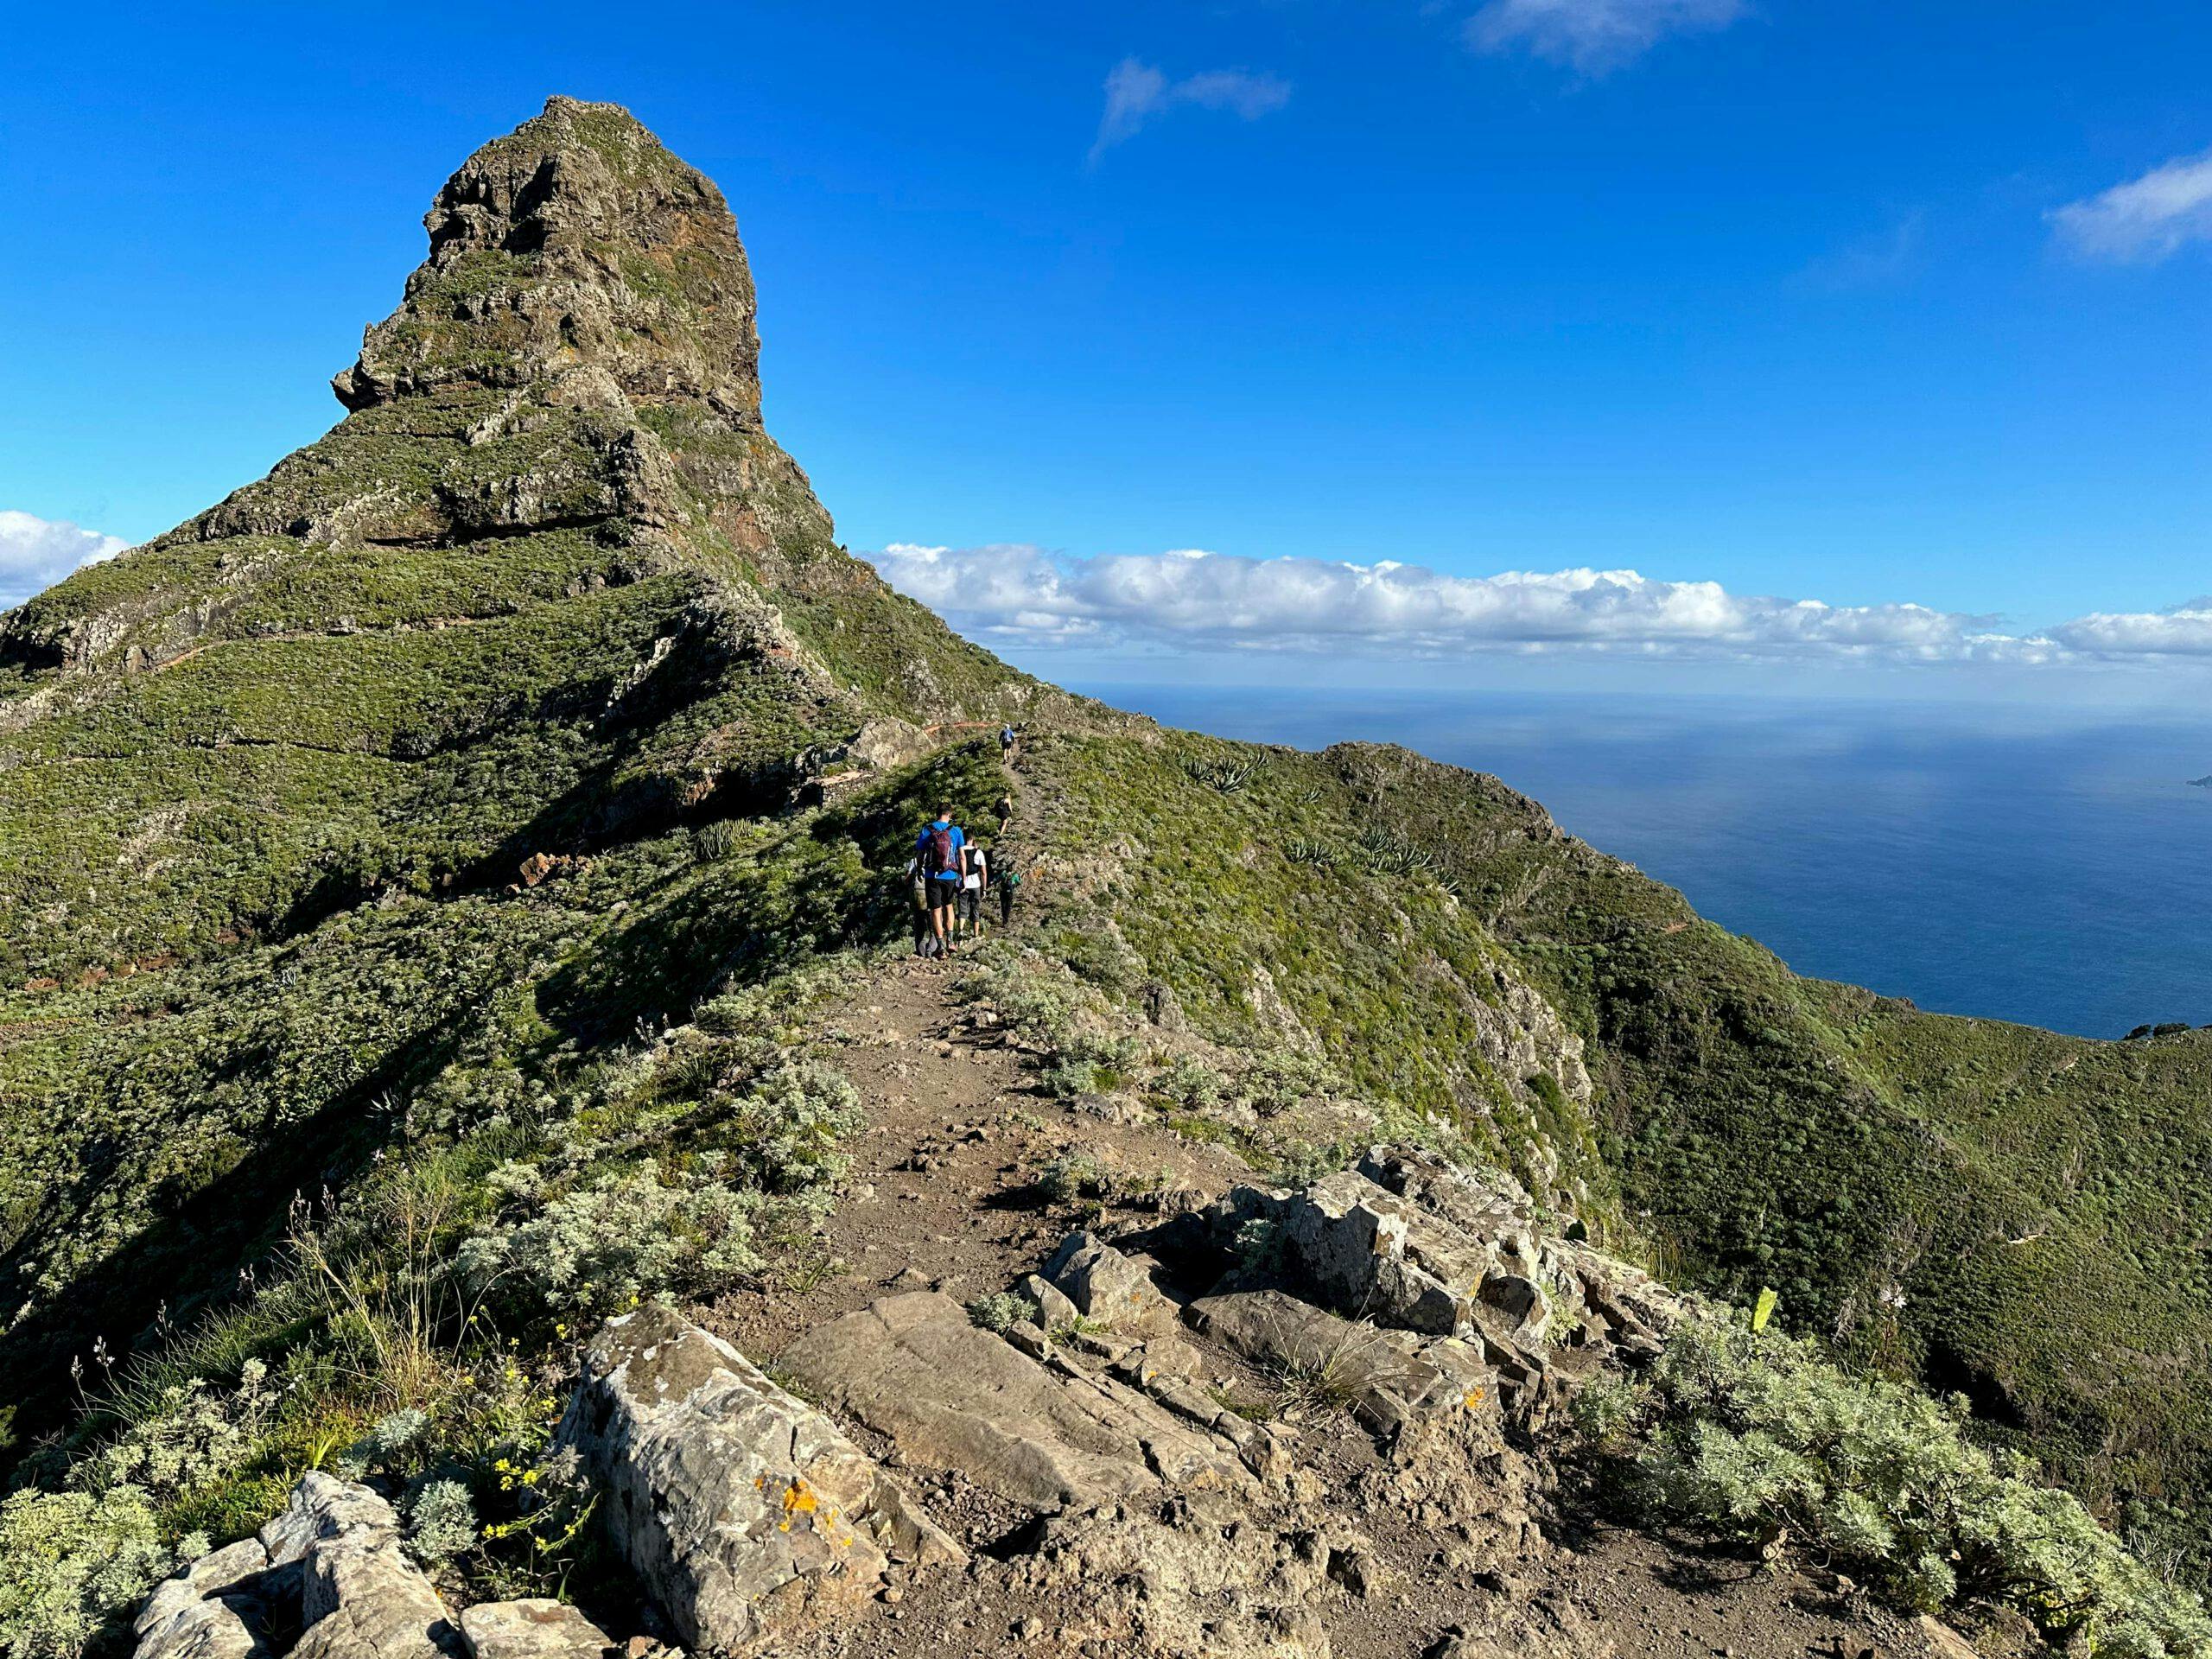 Roque de Taborno – Great Hiking Tour with a Visit to the “Materhorn of Tenerife”